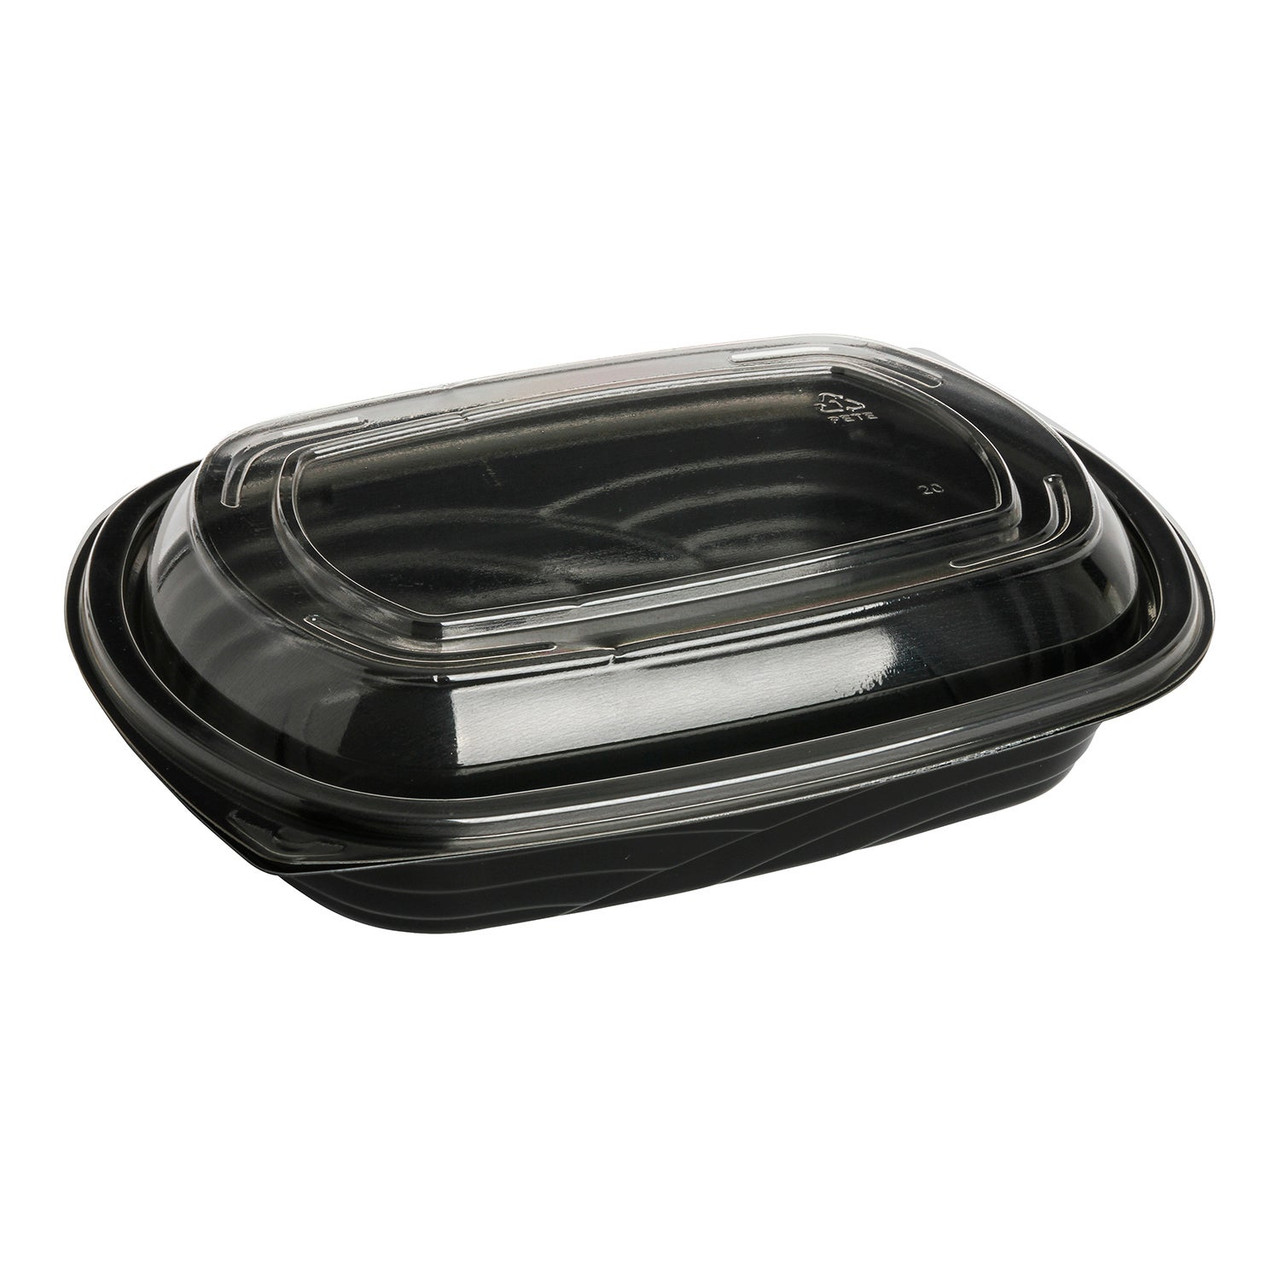 Microraves 24oz Black Plastic Containers, 8.85X6.41X2.54In, With Clear Dome Lid, Microwaveable | 126UN/Unit, 1 Unit/Case